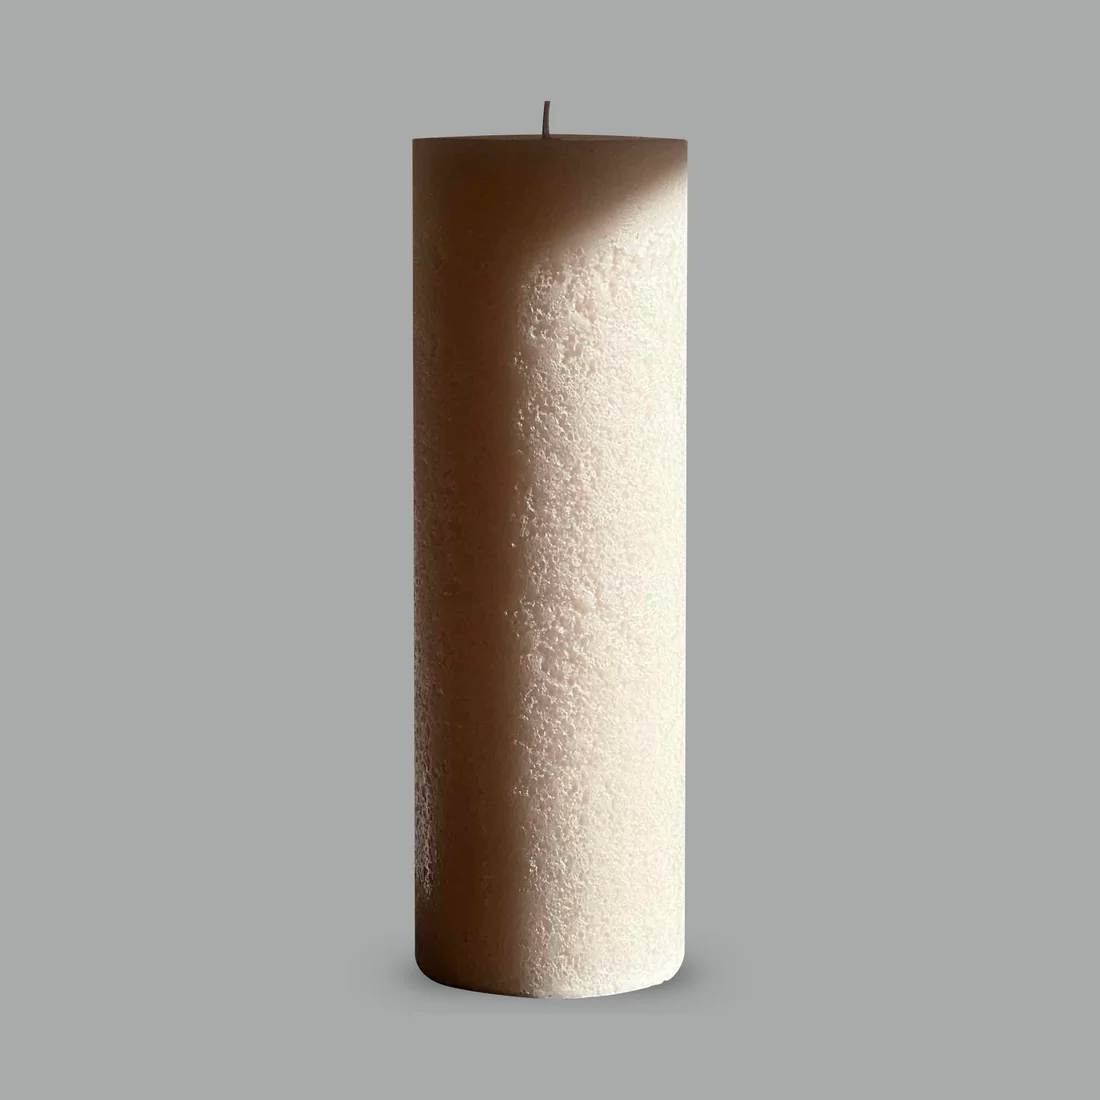 Candle Kiosk - Textured Sandstone Pillar Candles - large candle - Stocked at LOVINLIFE Co Byron Bay for all your gifts, candles and interior decorating needs